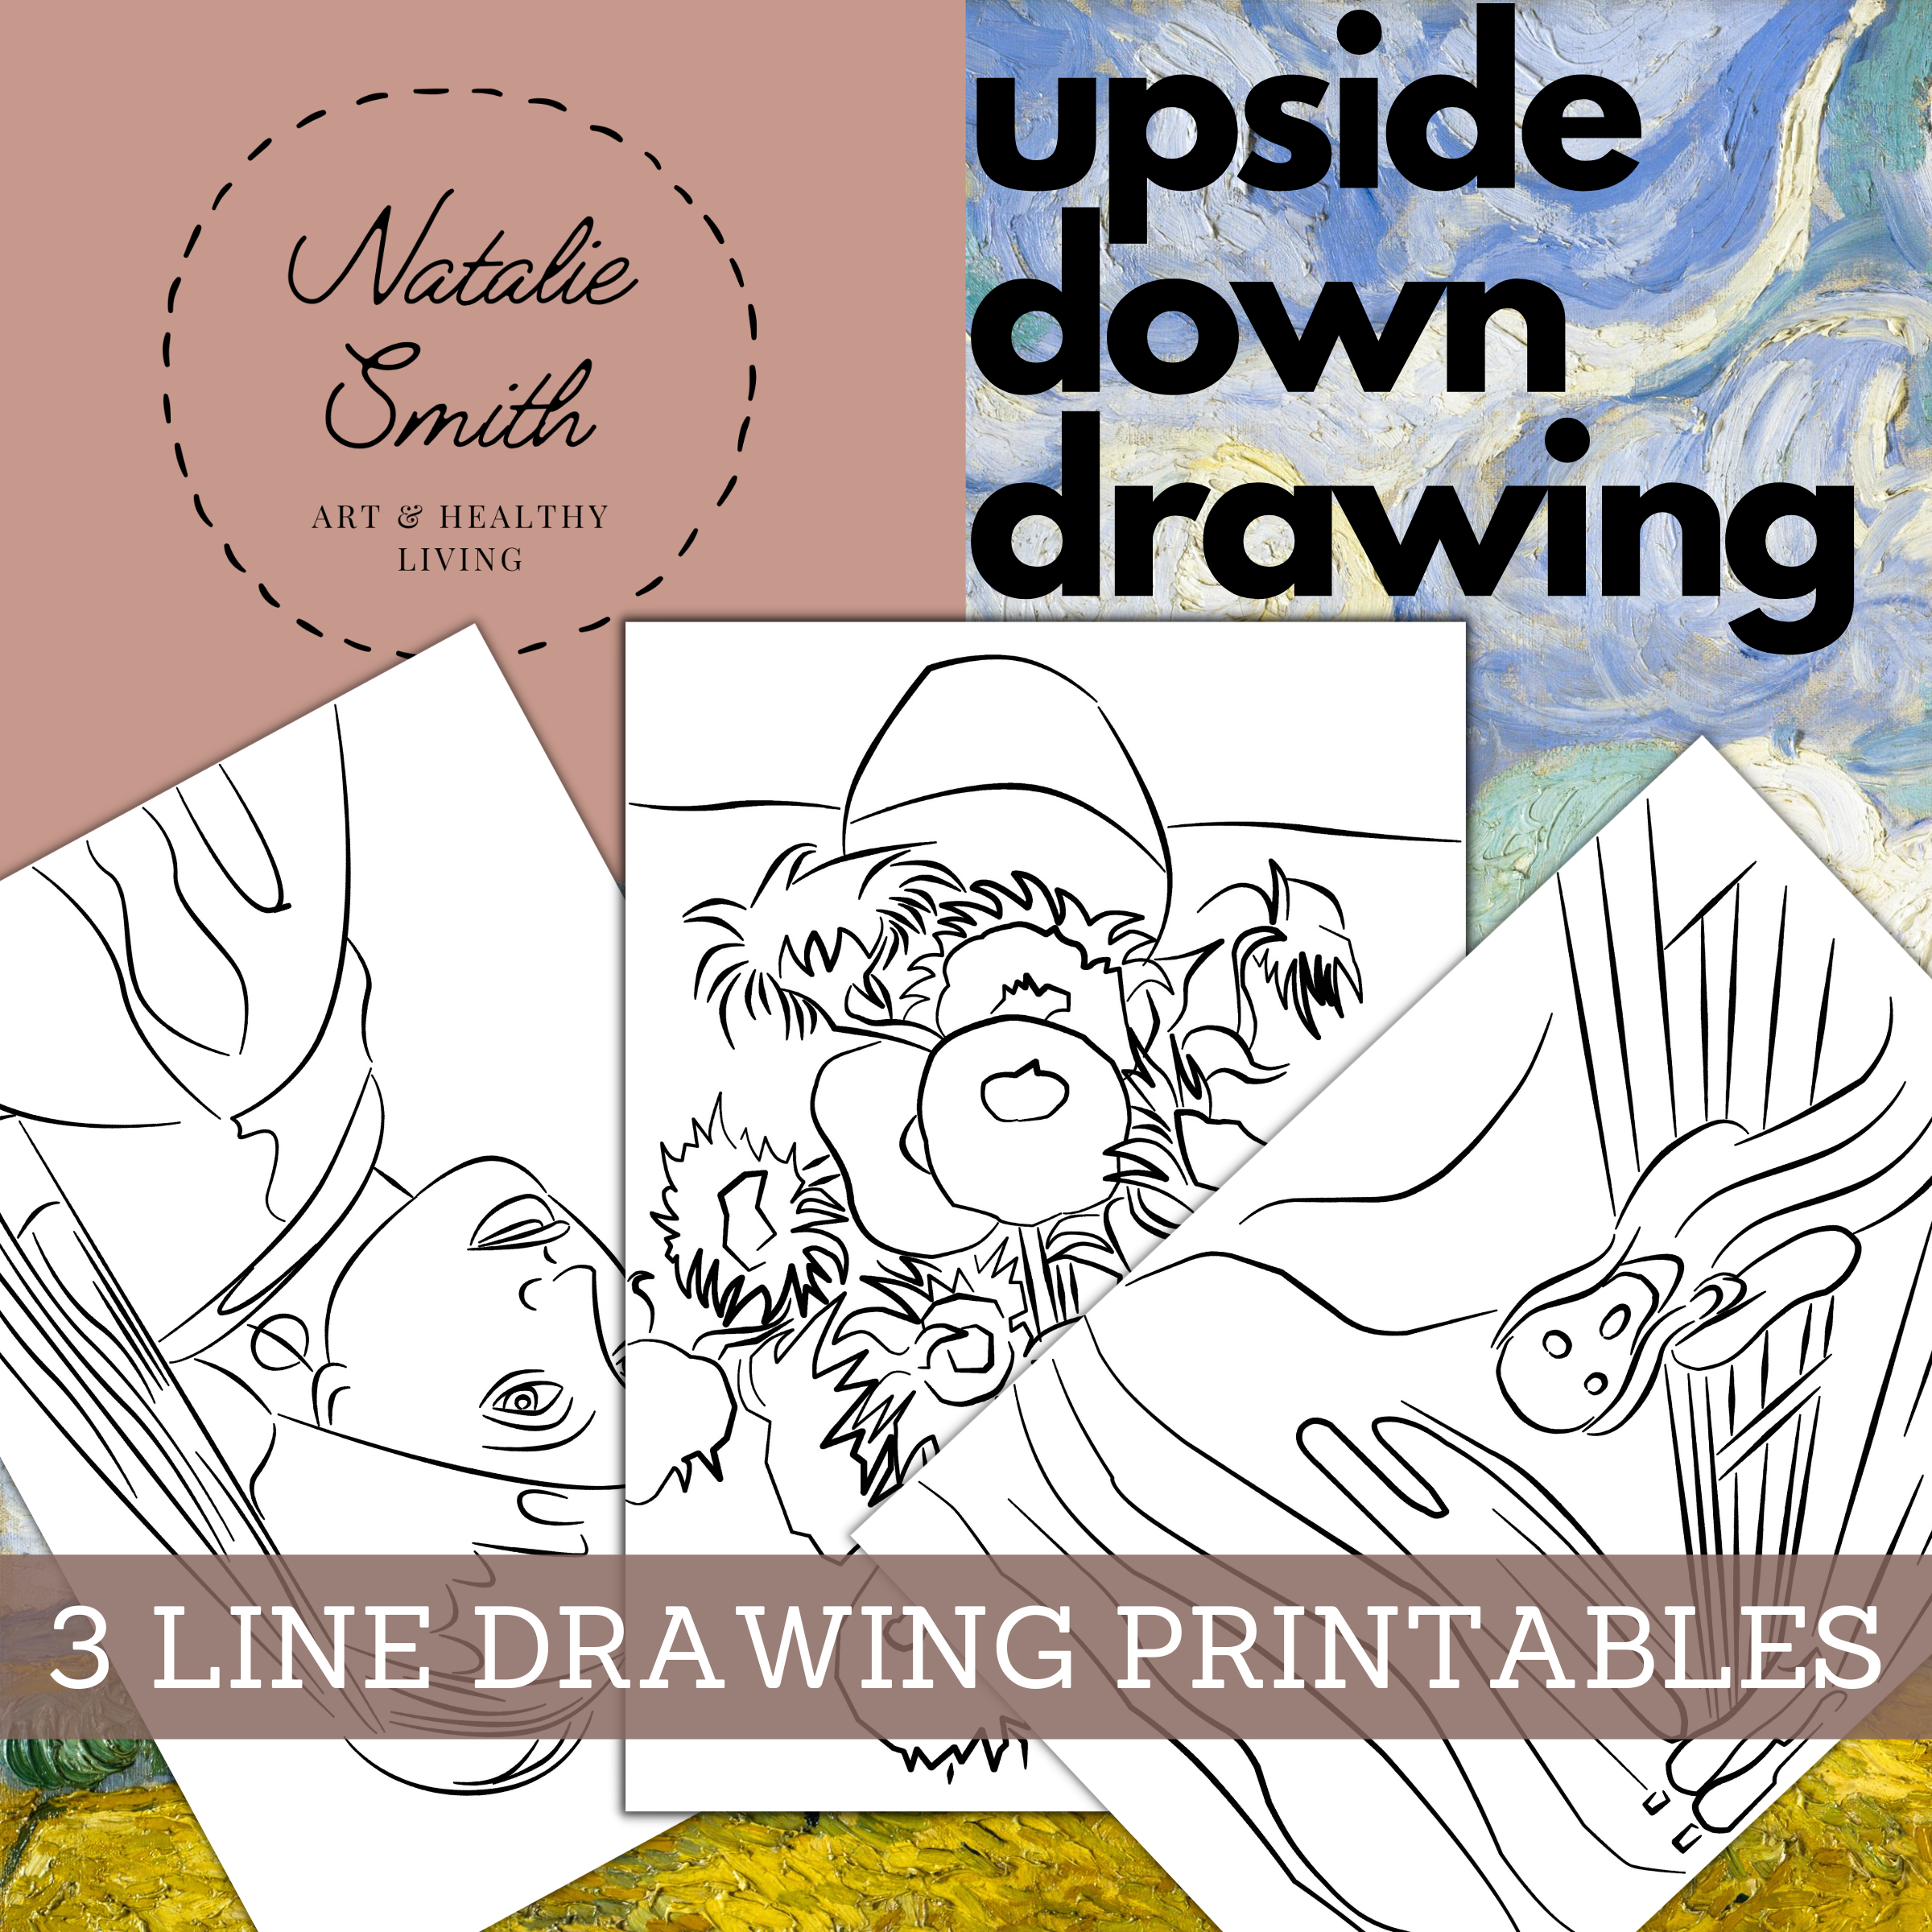 Upside-Down Drawing Lesson